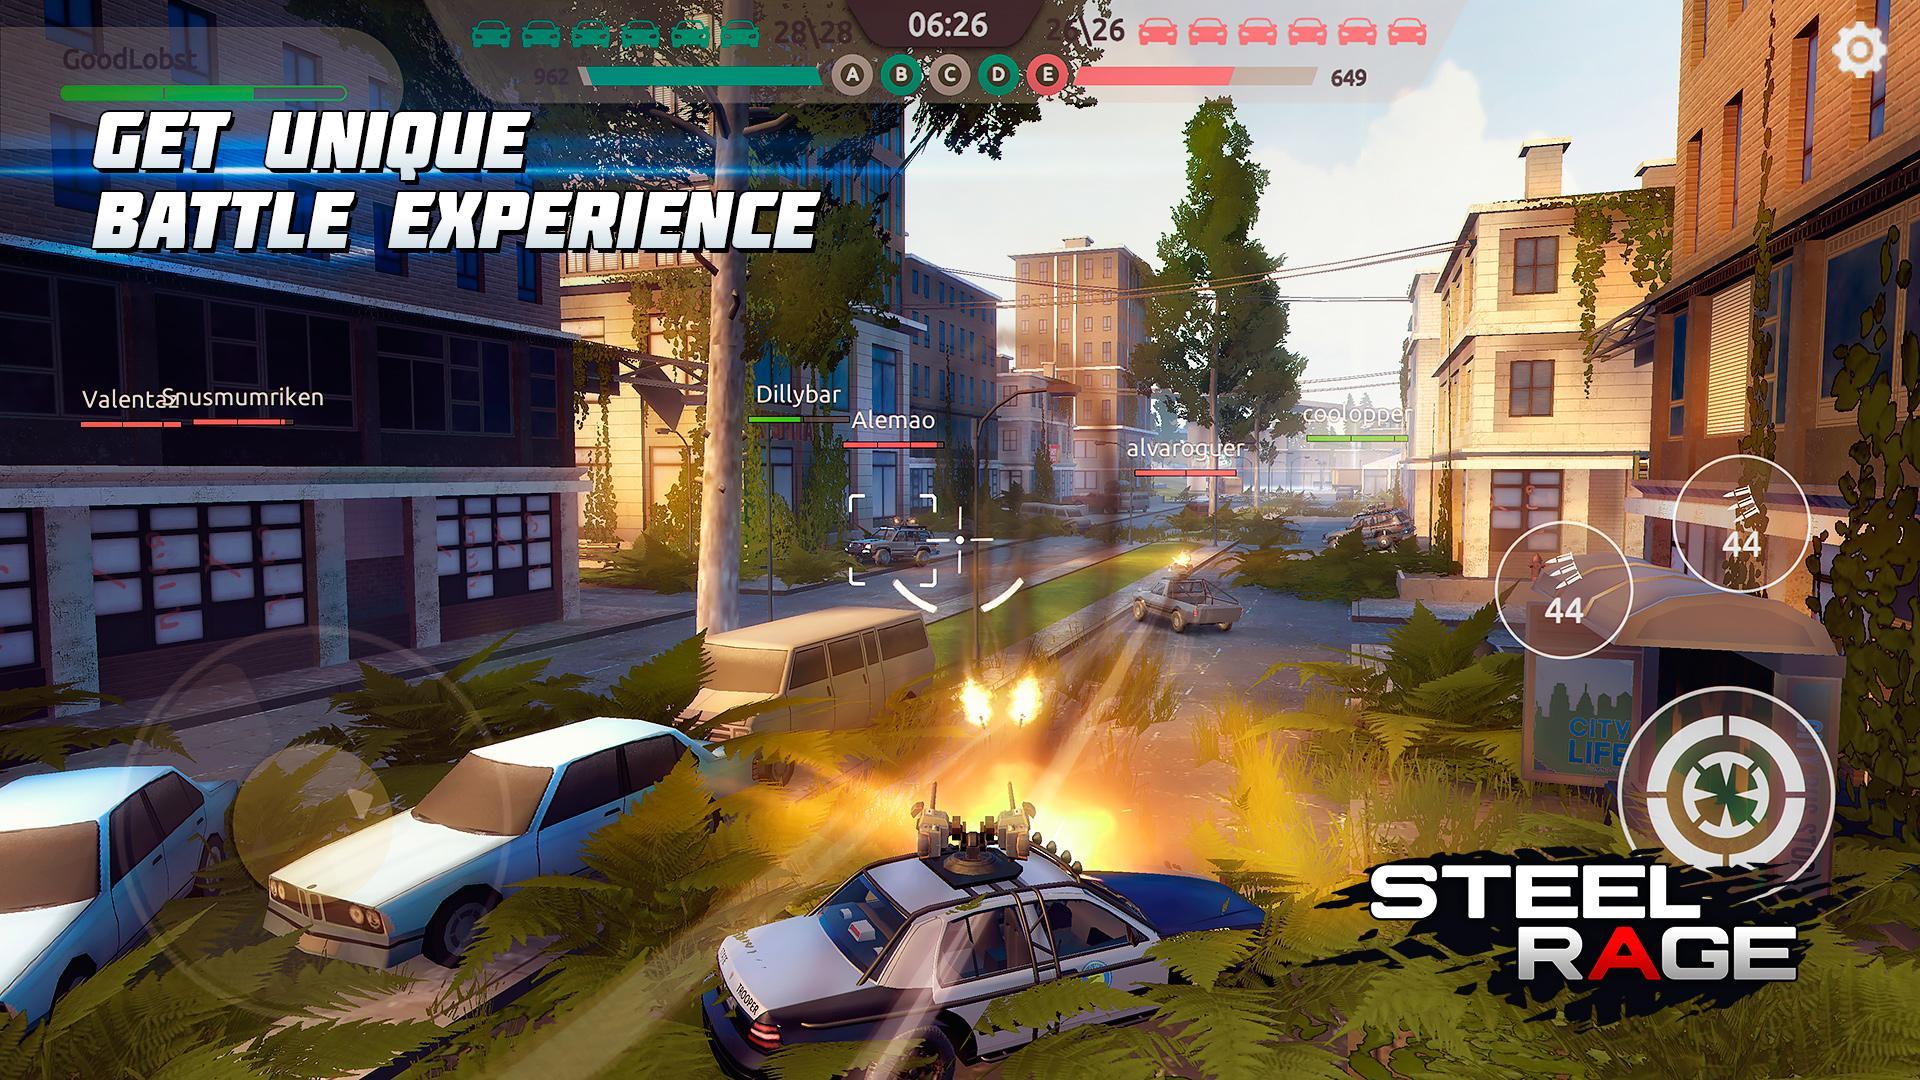 Download Steel Rage, Robot Cars PvP Shooter Warfare APK For Android